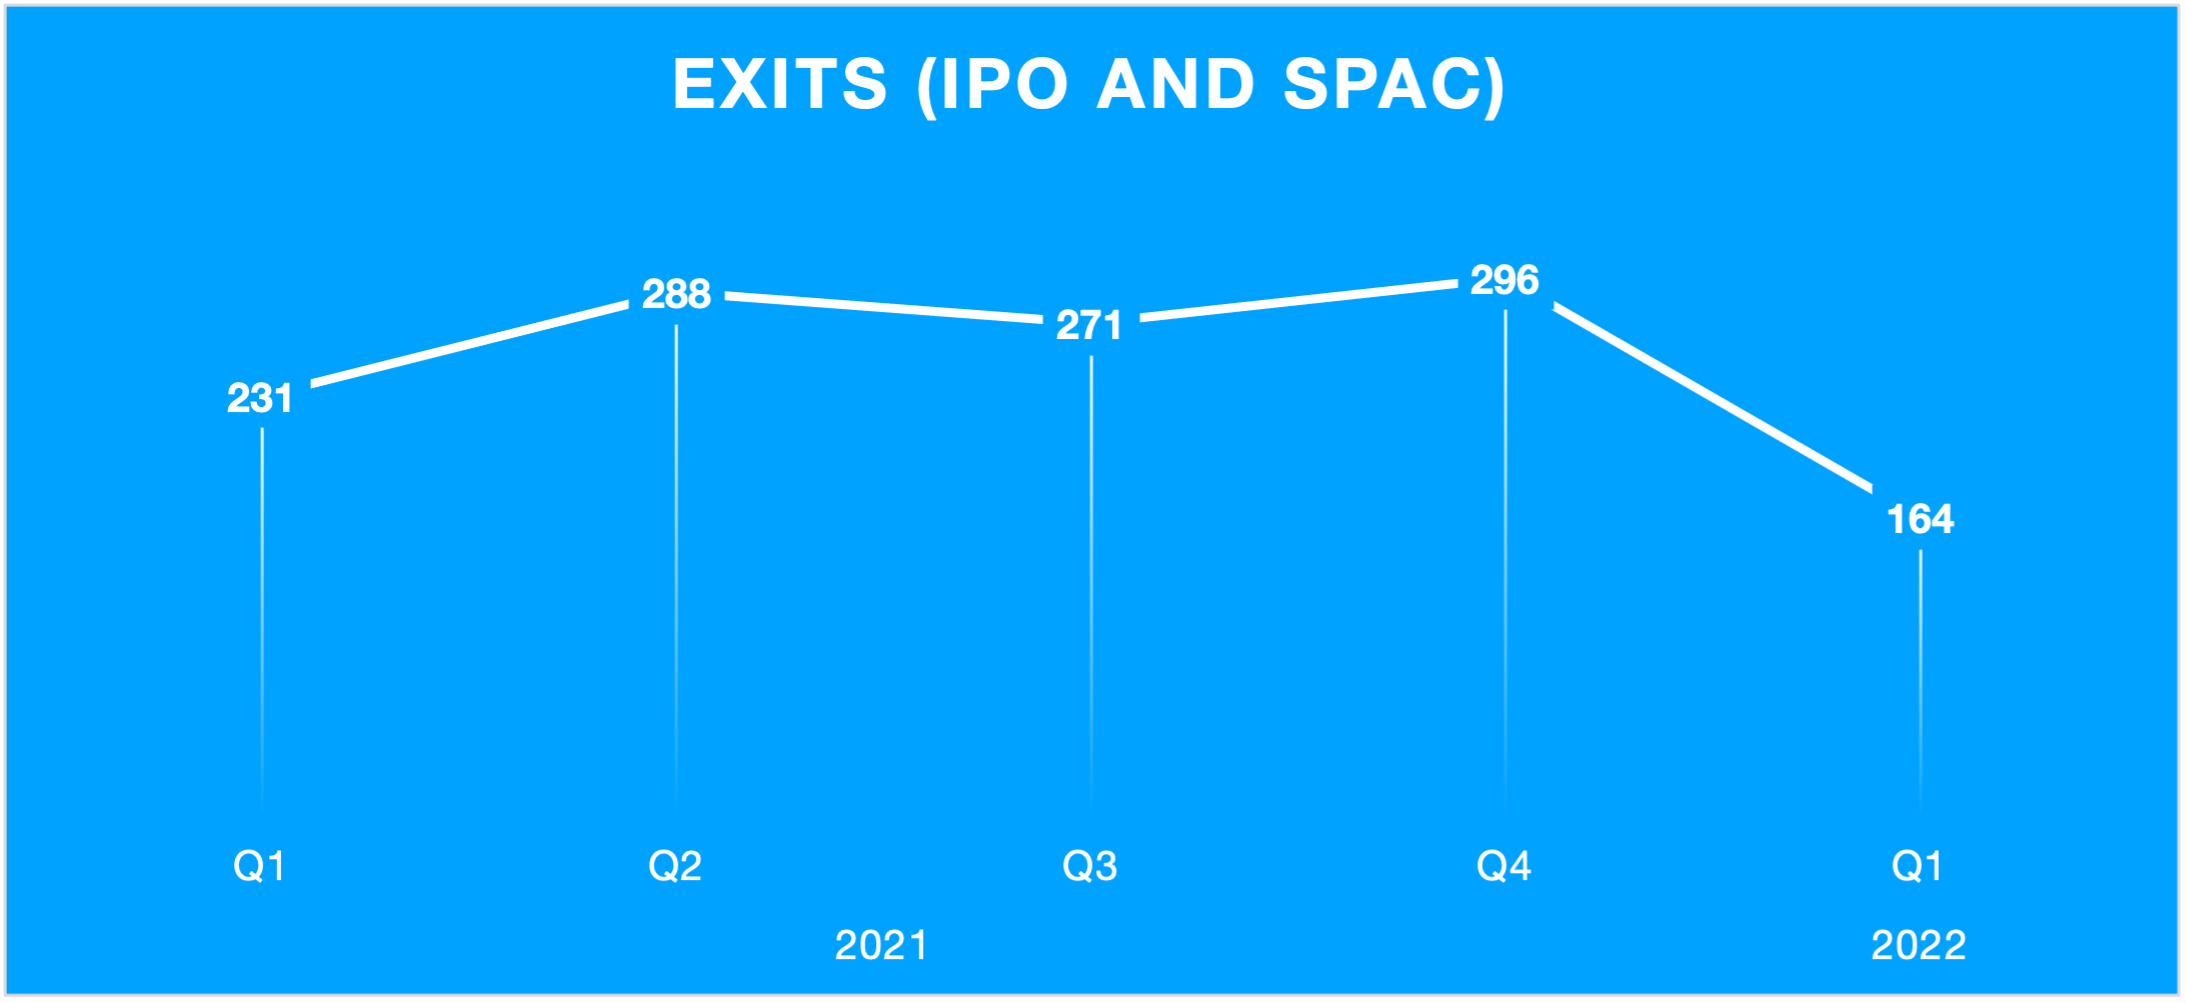 EXITS IPO and SPAC